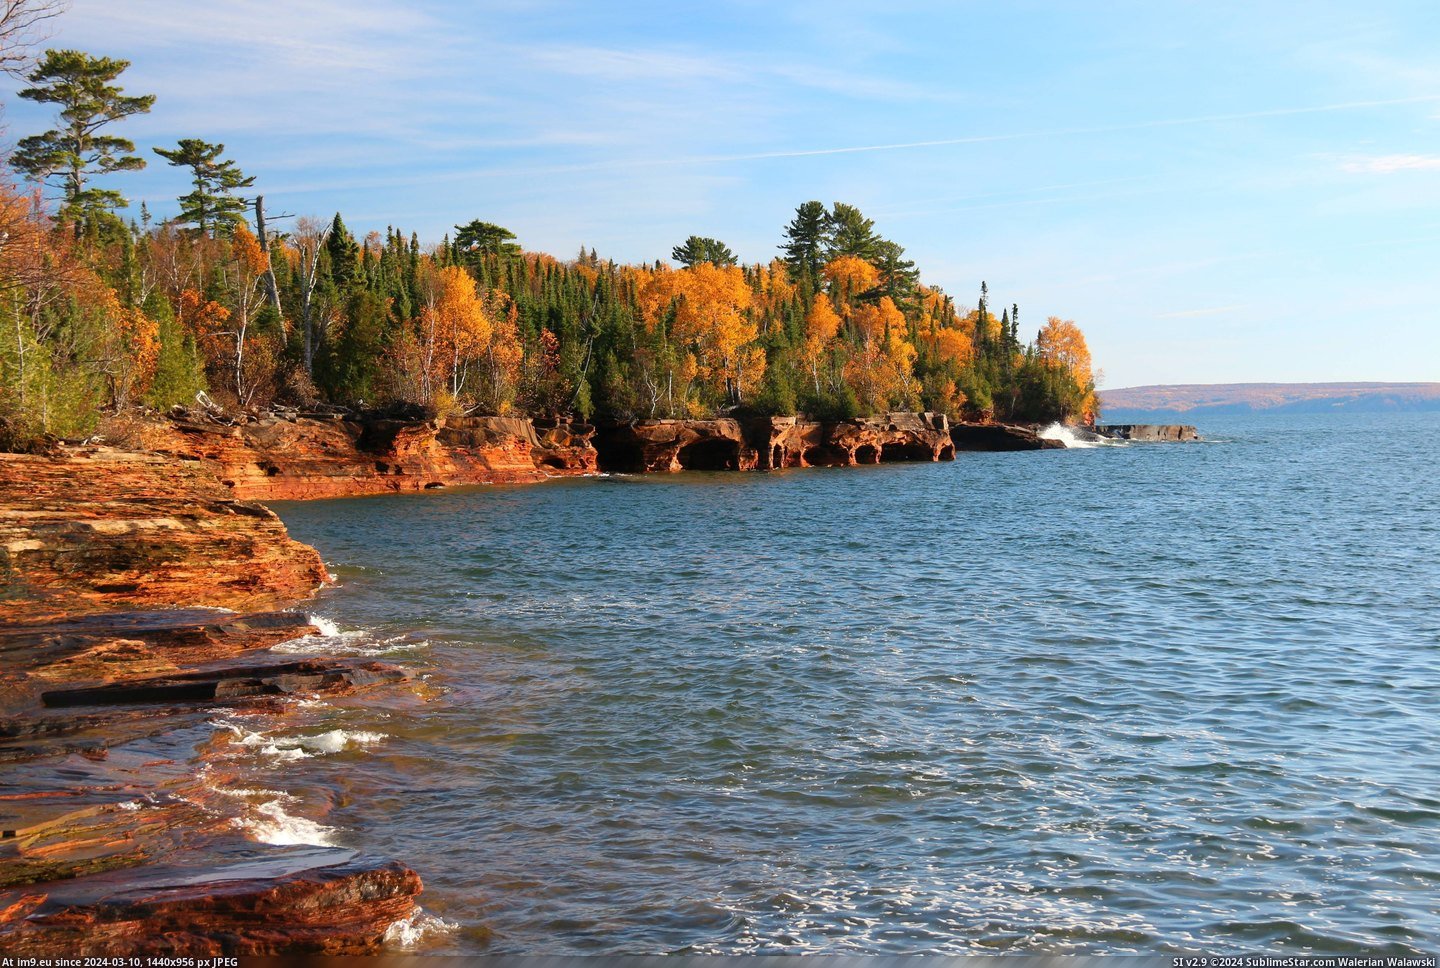 #National #Island #Fall #Wisconsin #4000x2667 #Apostle #Lakeshore #Islands #Devil #Colors [Earthporn] Fall colors on Devil's Island. Apostle Islands National Lakeshore, Wisconsin. [OC] [4000X2667] Pic. (Image of album My r/EARTHPORN favs))